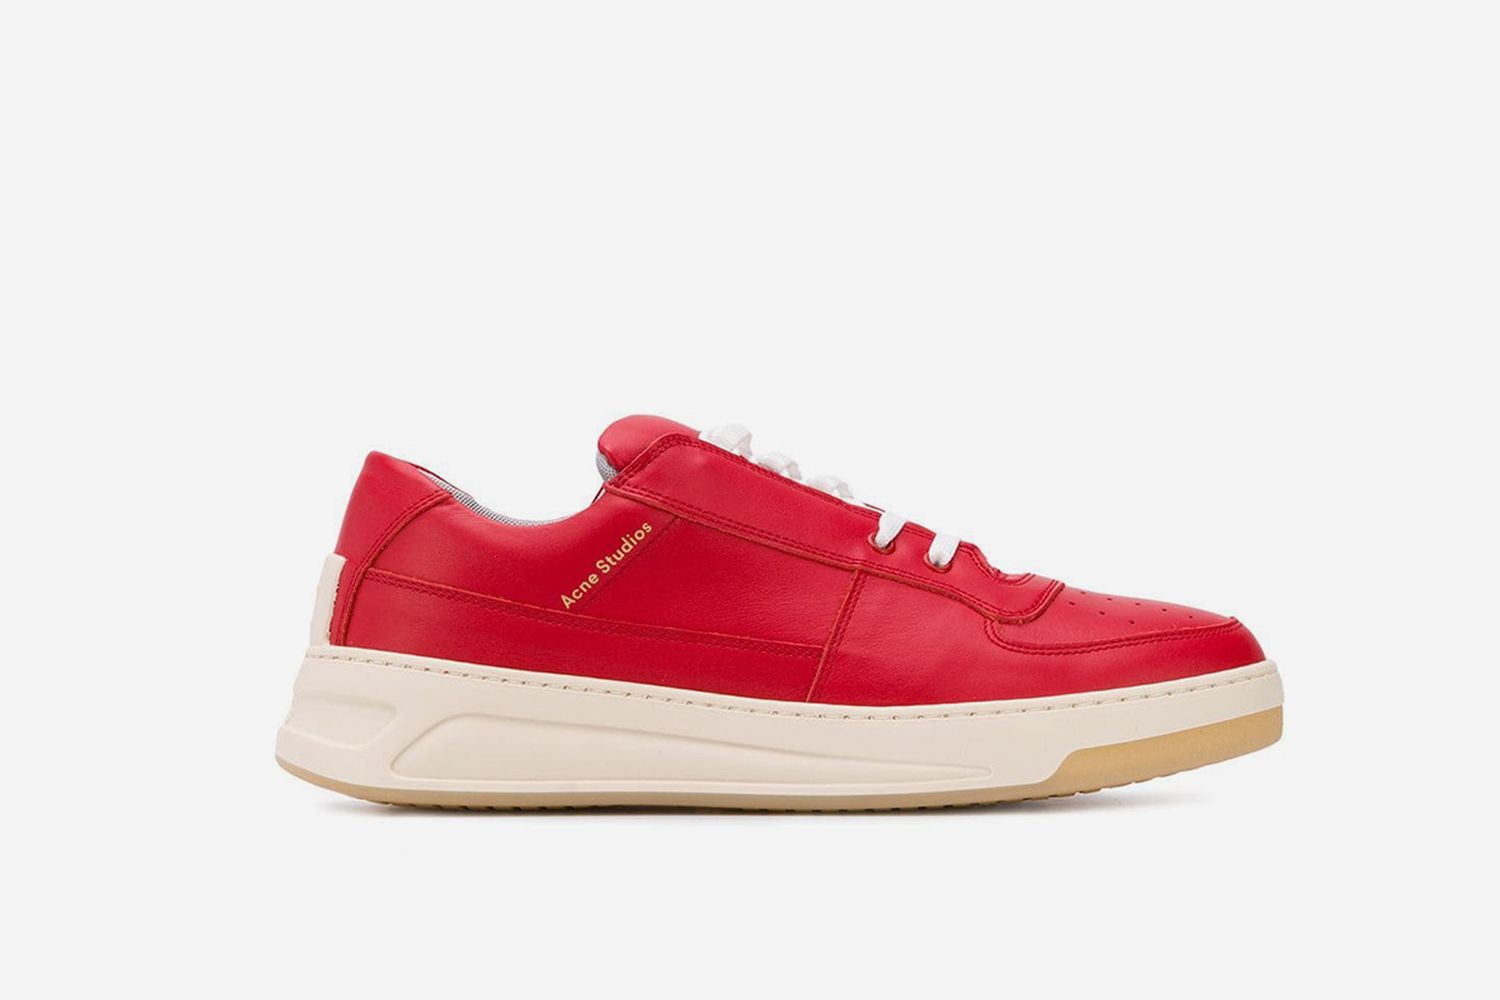 region Fjern Pastor A SS19 Buyer's Guide to Acne Studios Sneakers